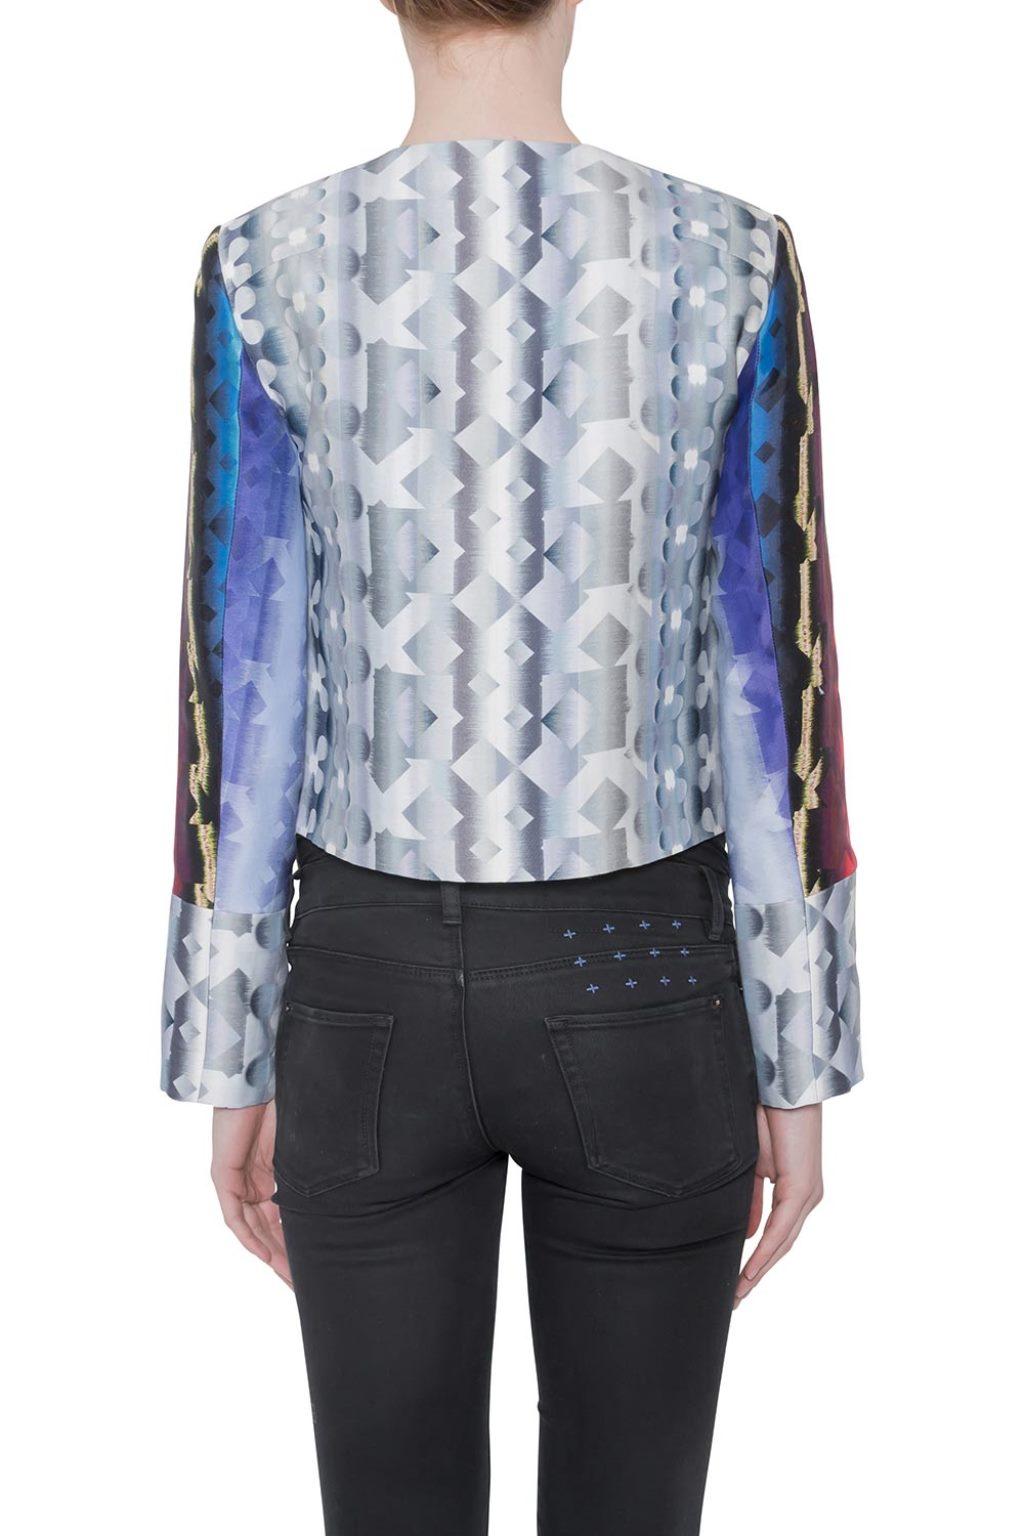 Isn't this jacket a unique creation. Made by Peter Pilotto, it has enticing geometric kaleidoscope print. The multicolor Box jacket features long sleeves and button front closure. Launched as a part of the Resort 2013 collection, it will be your